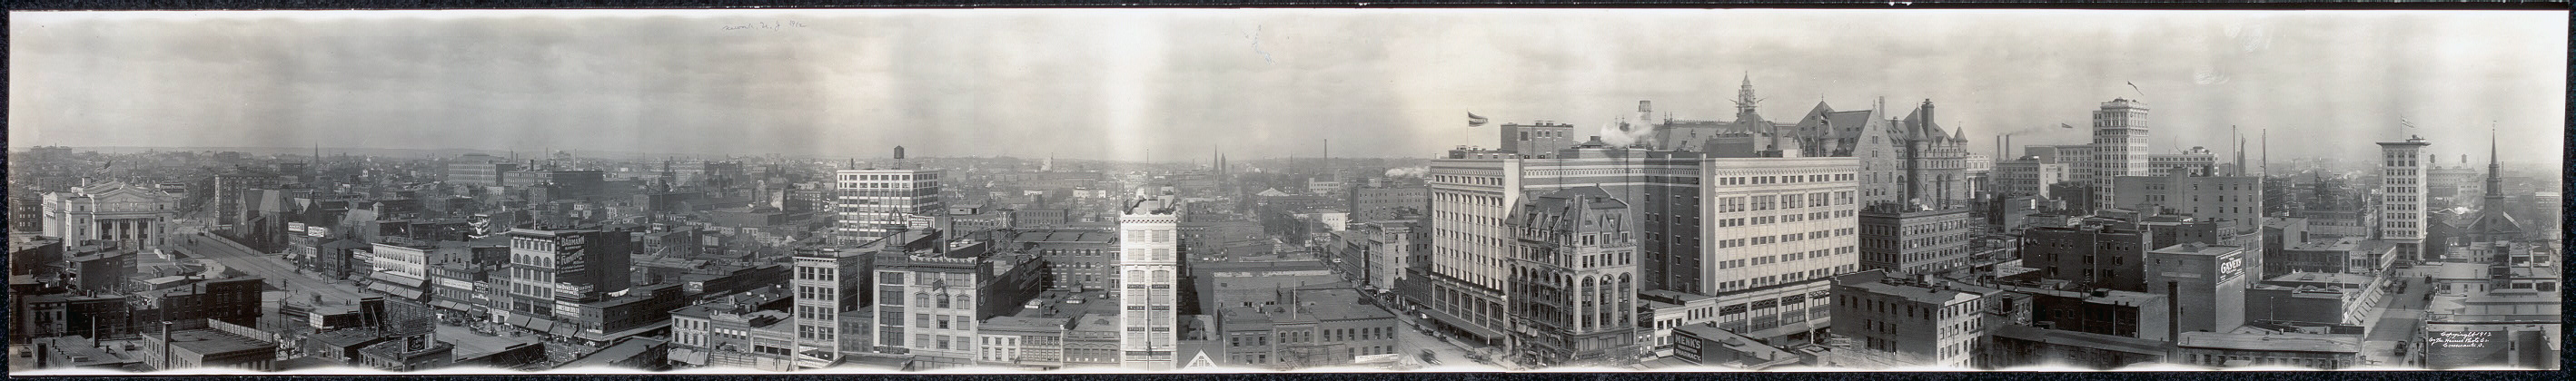 Black and white photo of a panoramic view of the city of Newark, New Jersey in 1912.